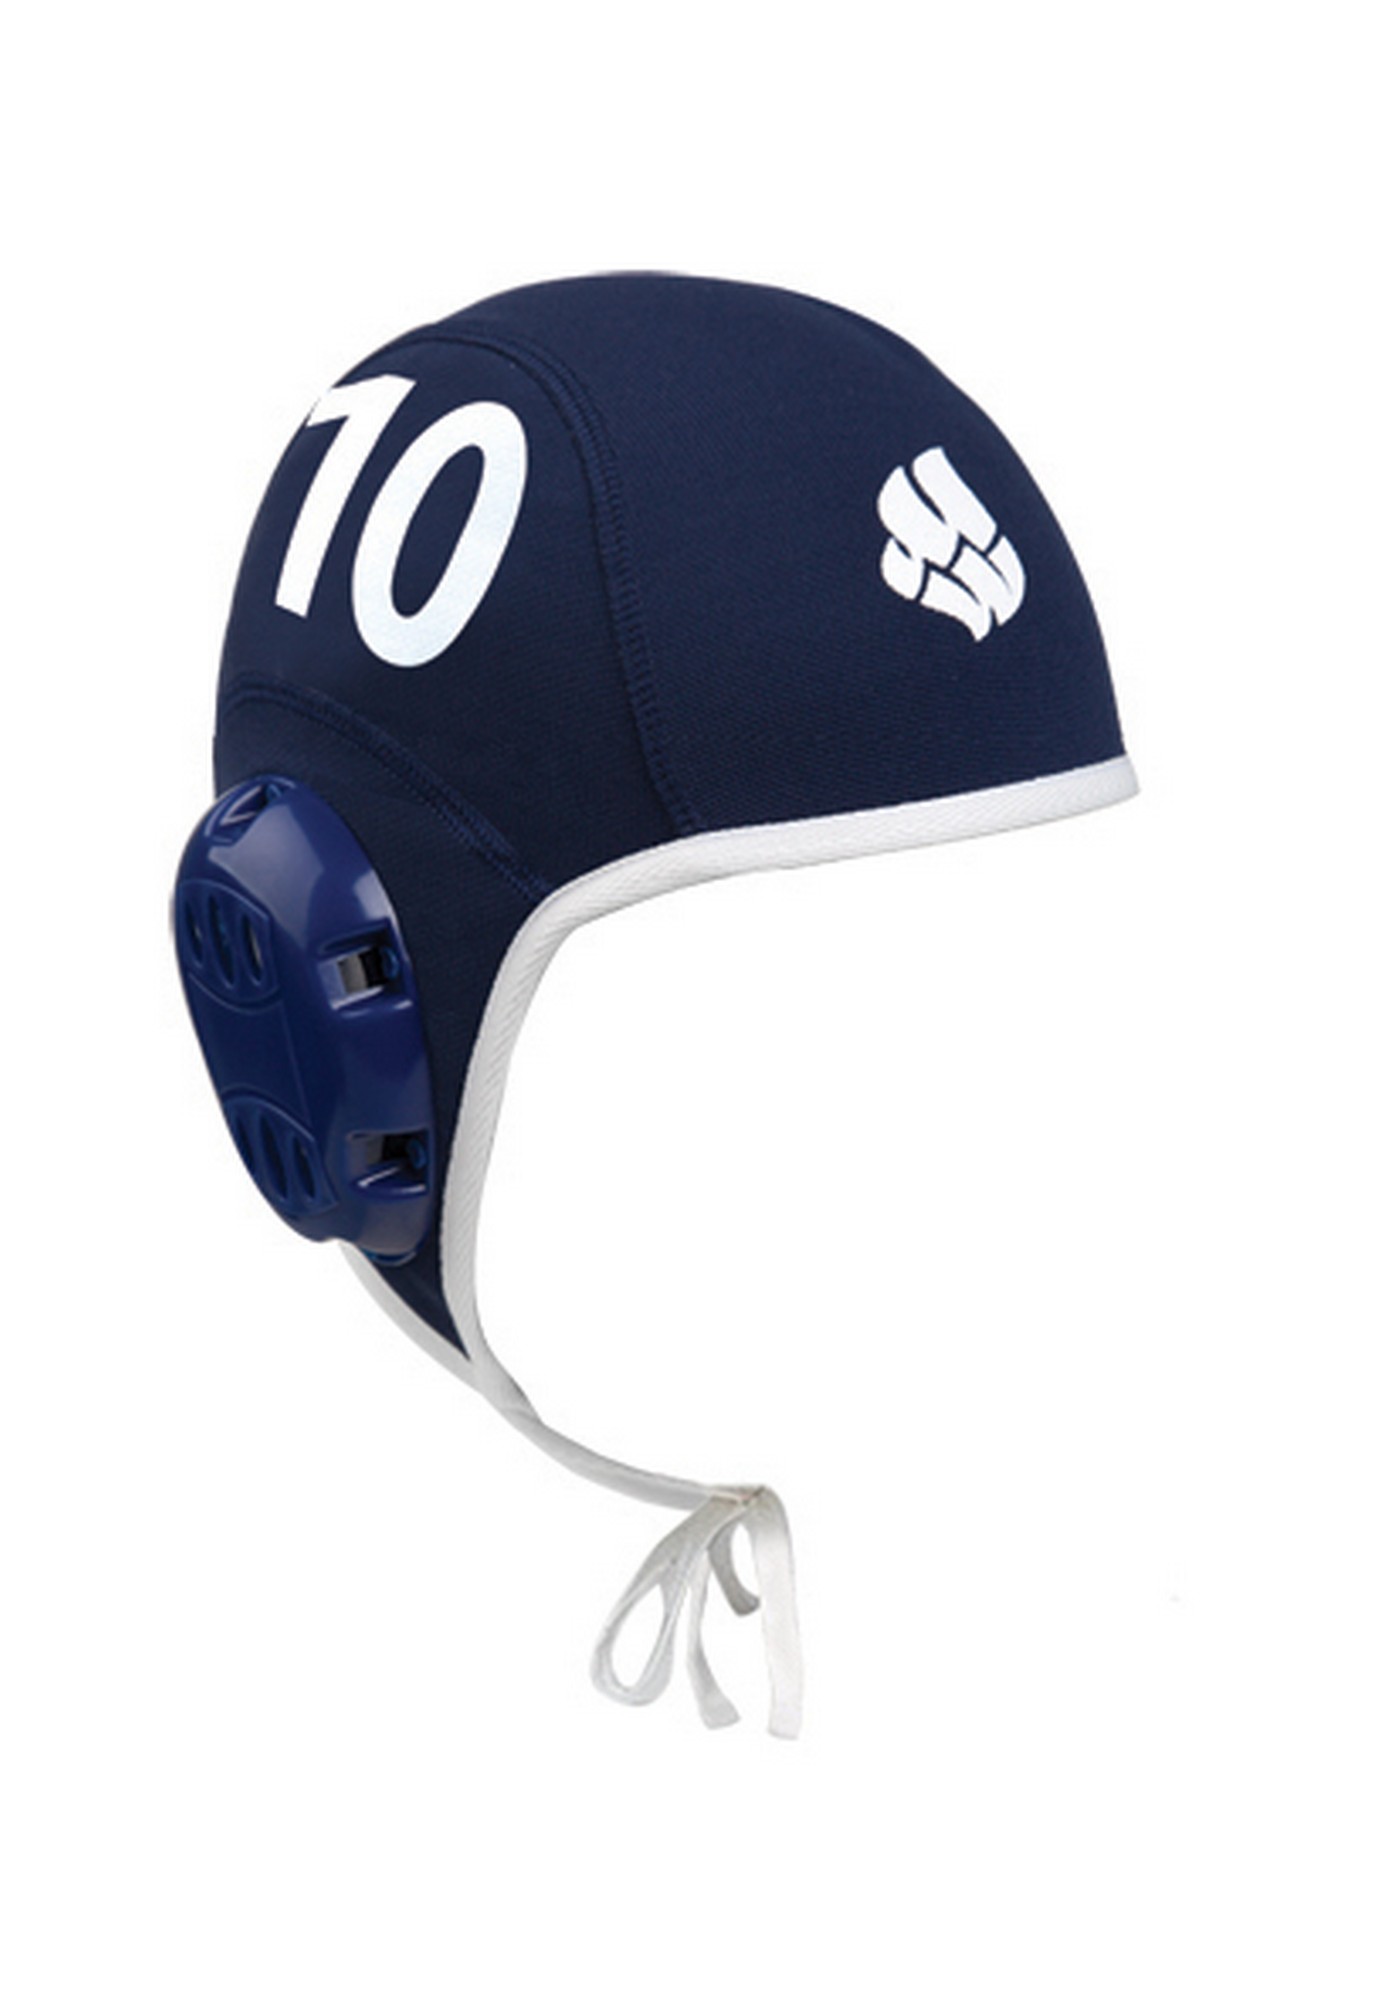     Mad Wave Waterpolo caps M0597 02 10 04W